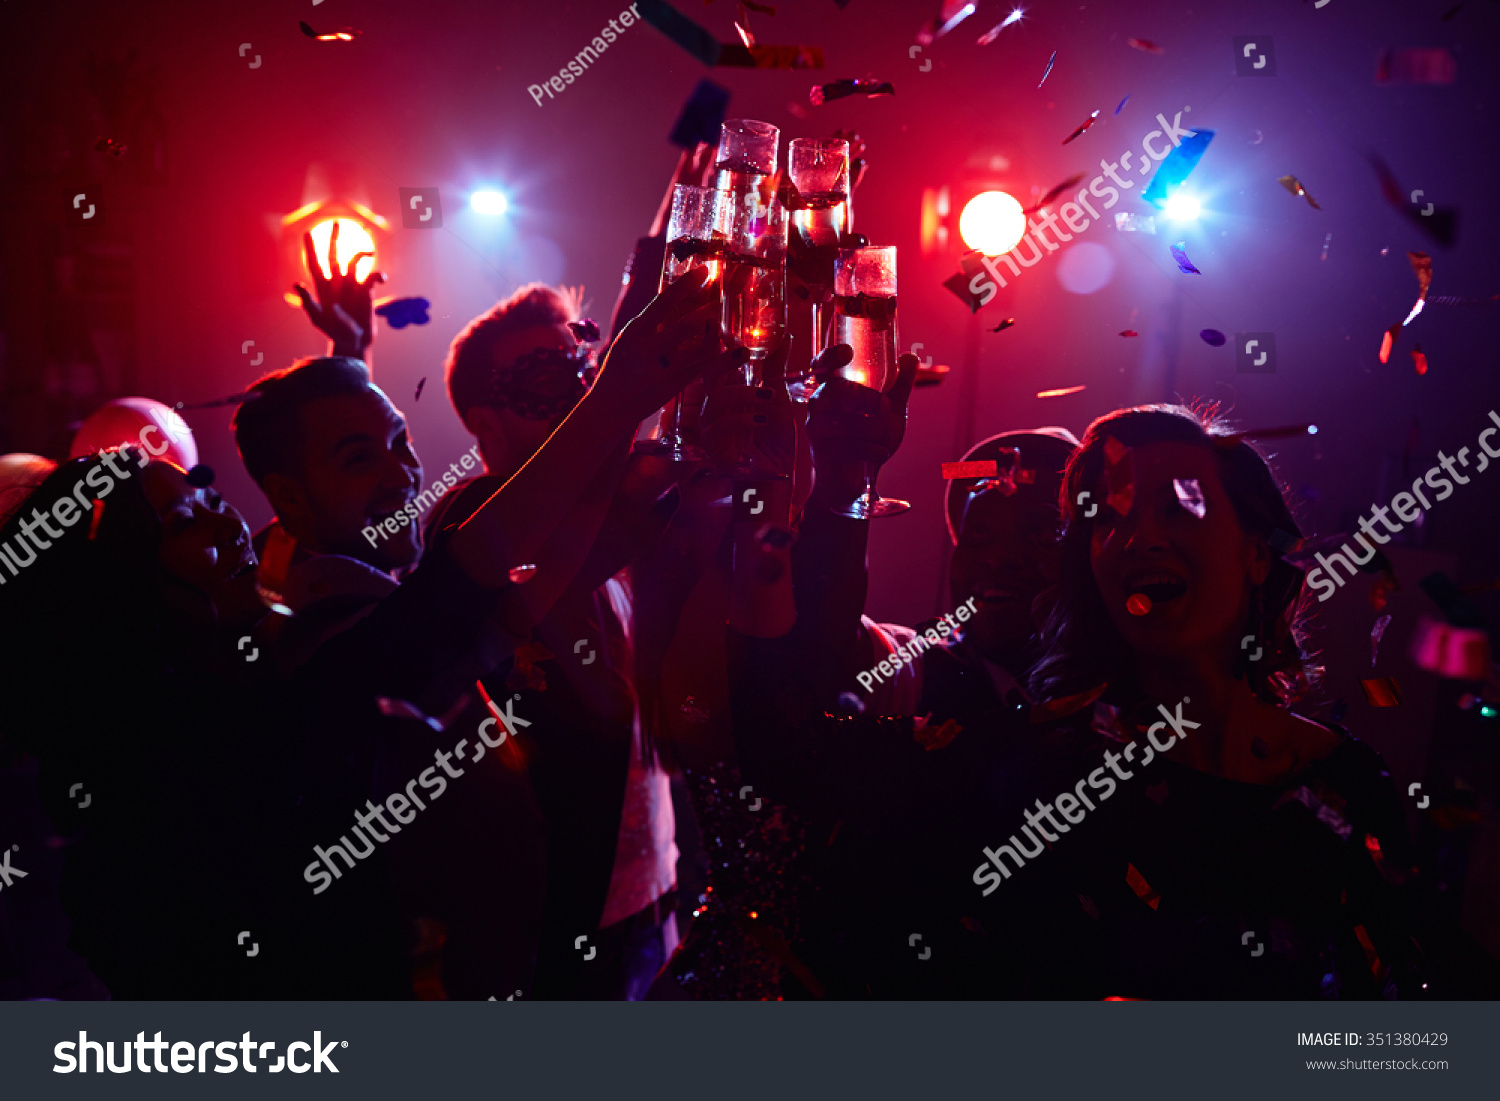 1,151,631 Cheering party Images, Stock Photos & Vectors | Shutterstock